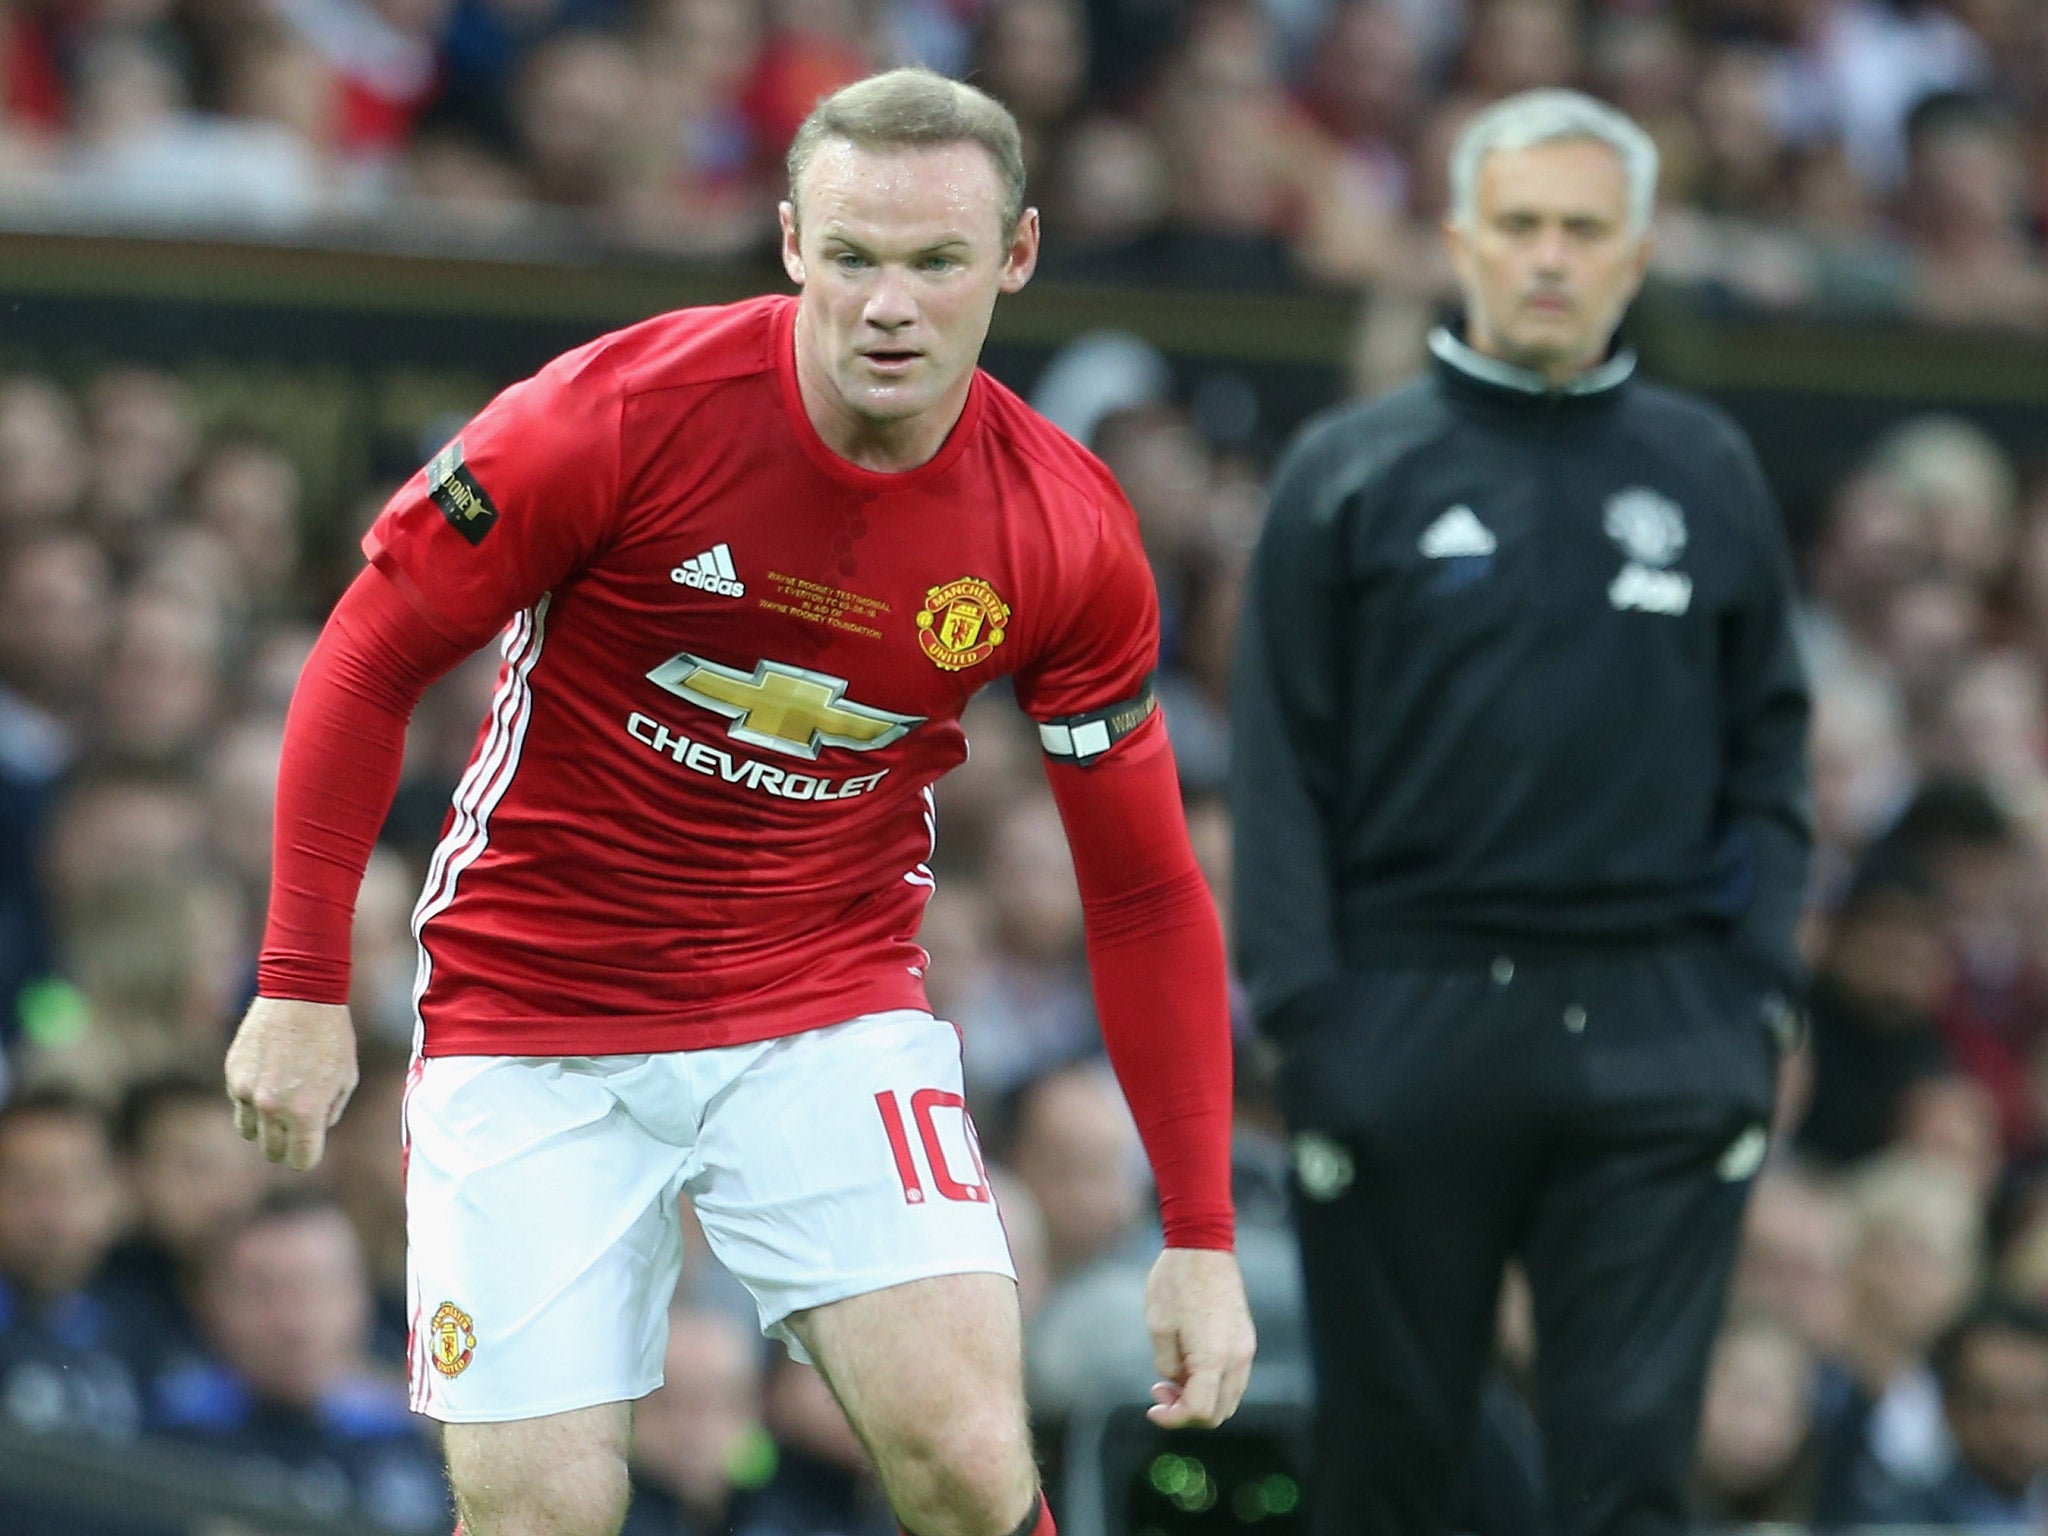 Wayne Rooney will need to prove he fits into Manchester United's plans for the future